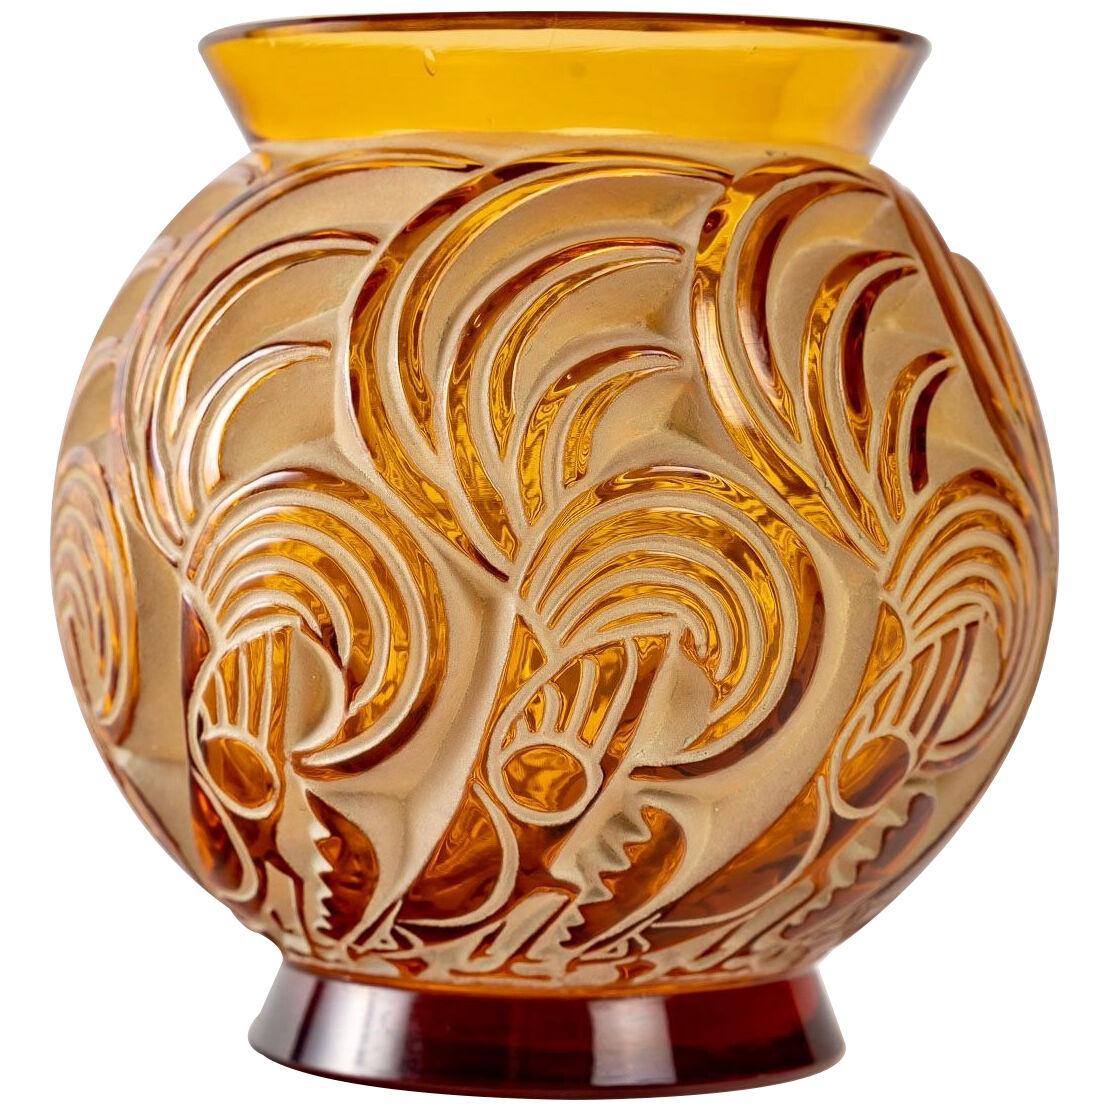 1931 René Lalique - Vase Le Mans Amber Yellow Glass With Green Beige Patina